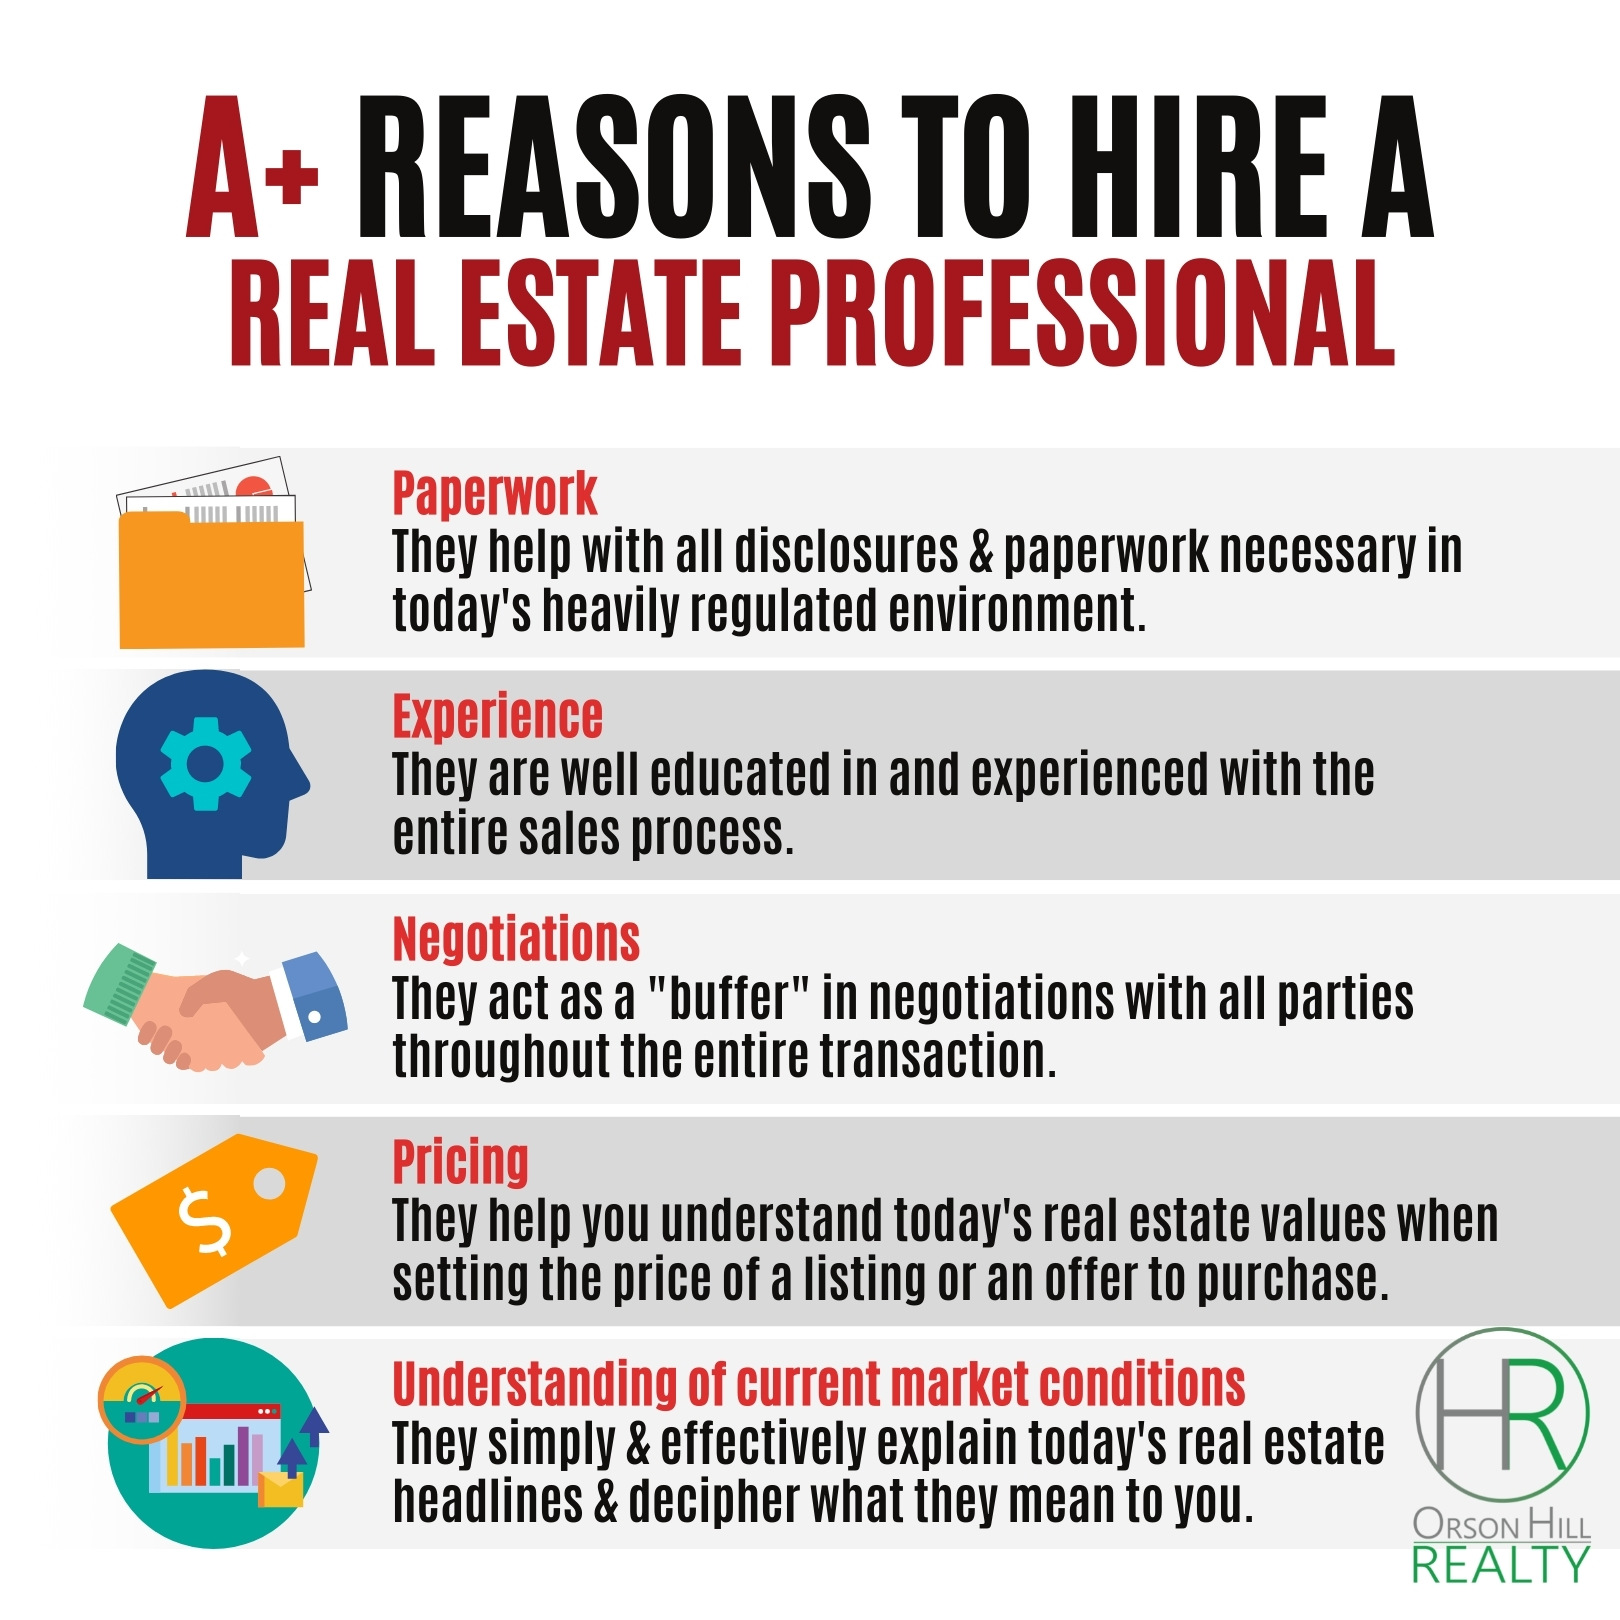 Finding the Best Real Estate Agent Isn’t Easy – Realtors are Not All The Same